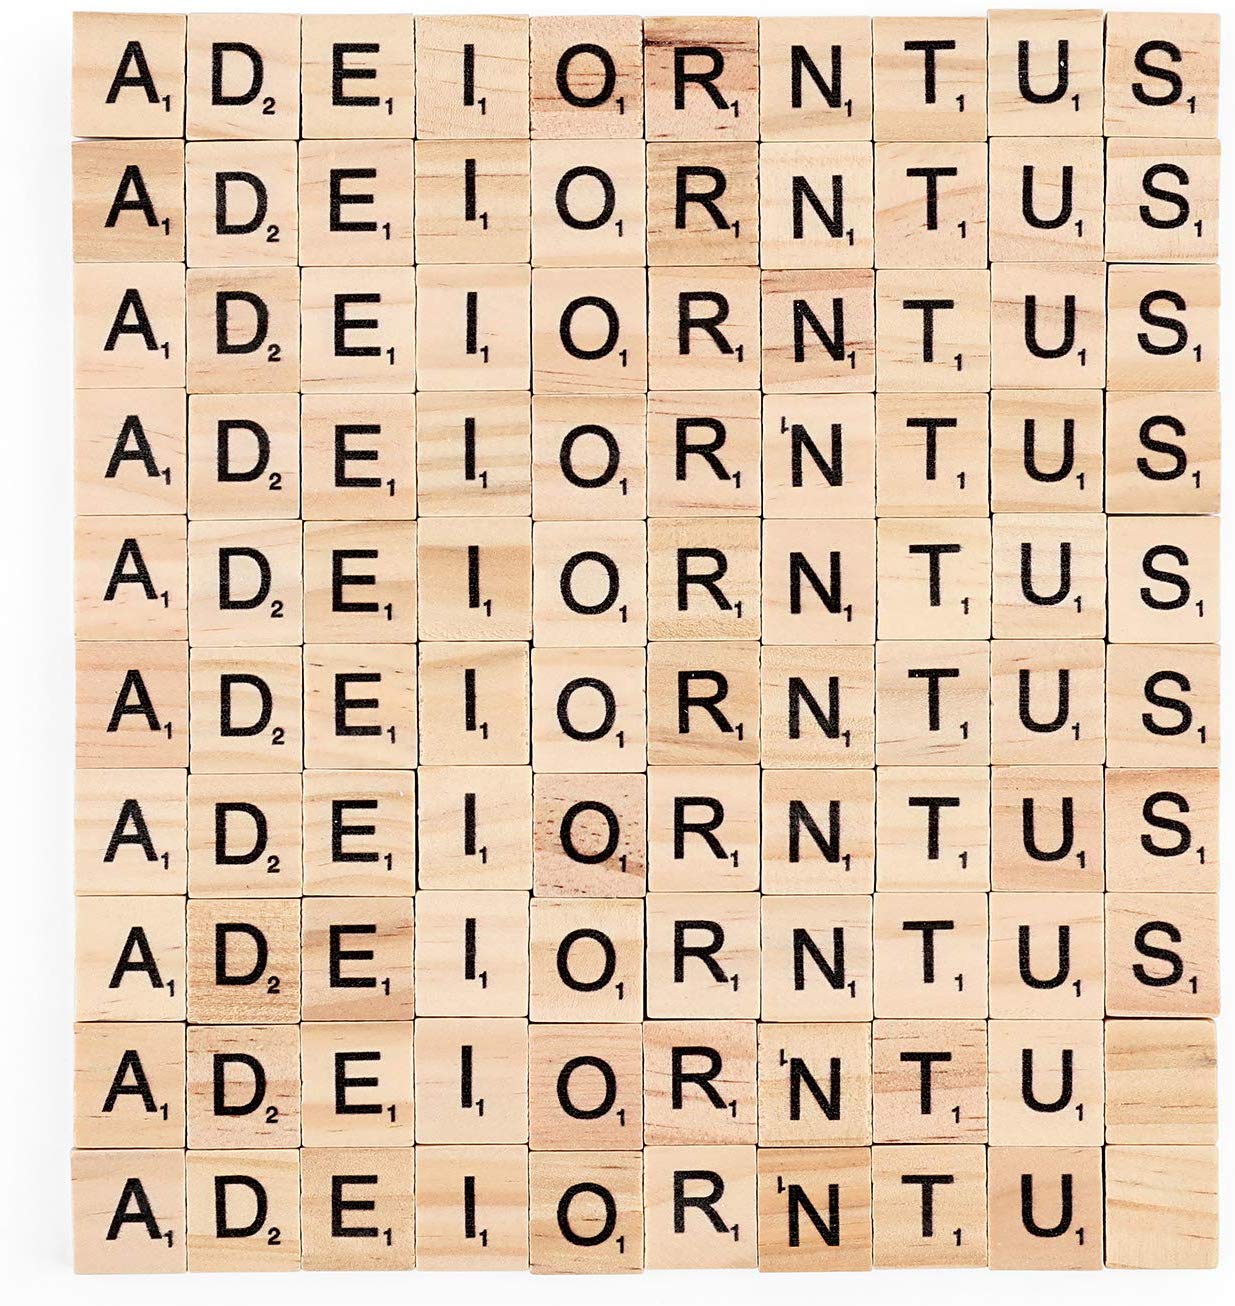 1000 Pcs Scrabble Letters for Crafts, Wood Scrabble tiles, DIY Wood Gift Decoration, Making Alphabet Coasters and Scrabble Crossword Game